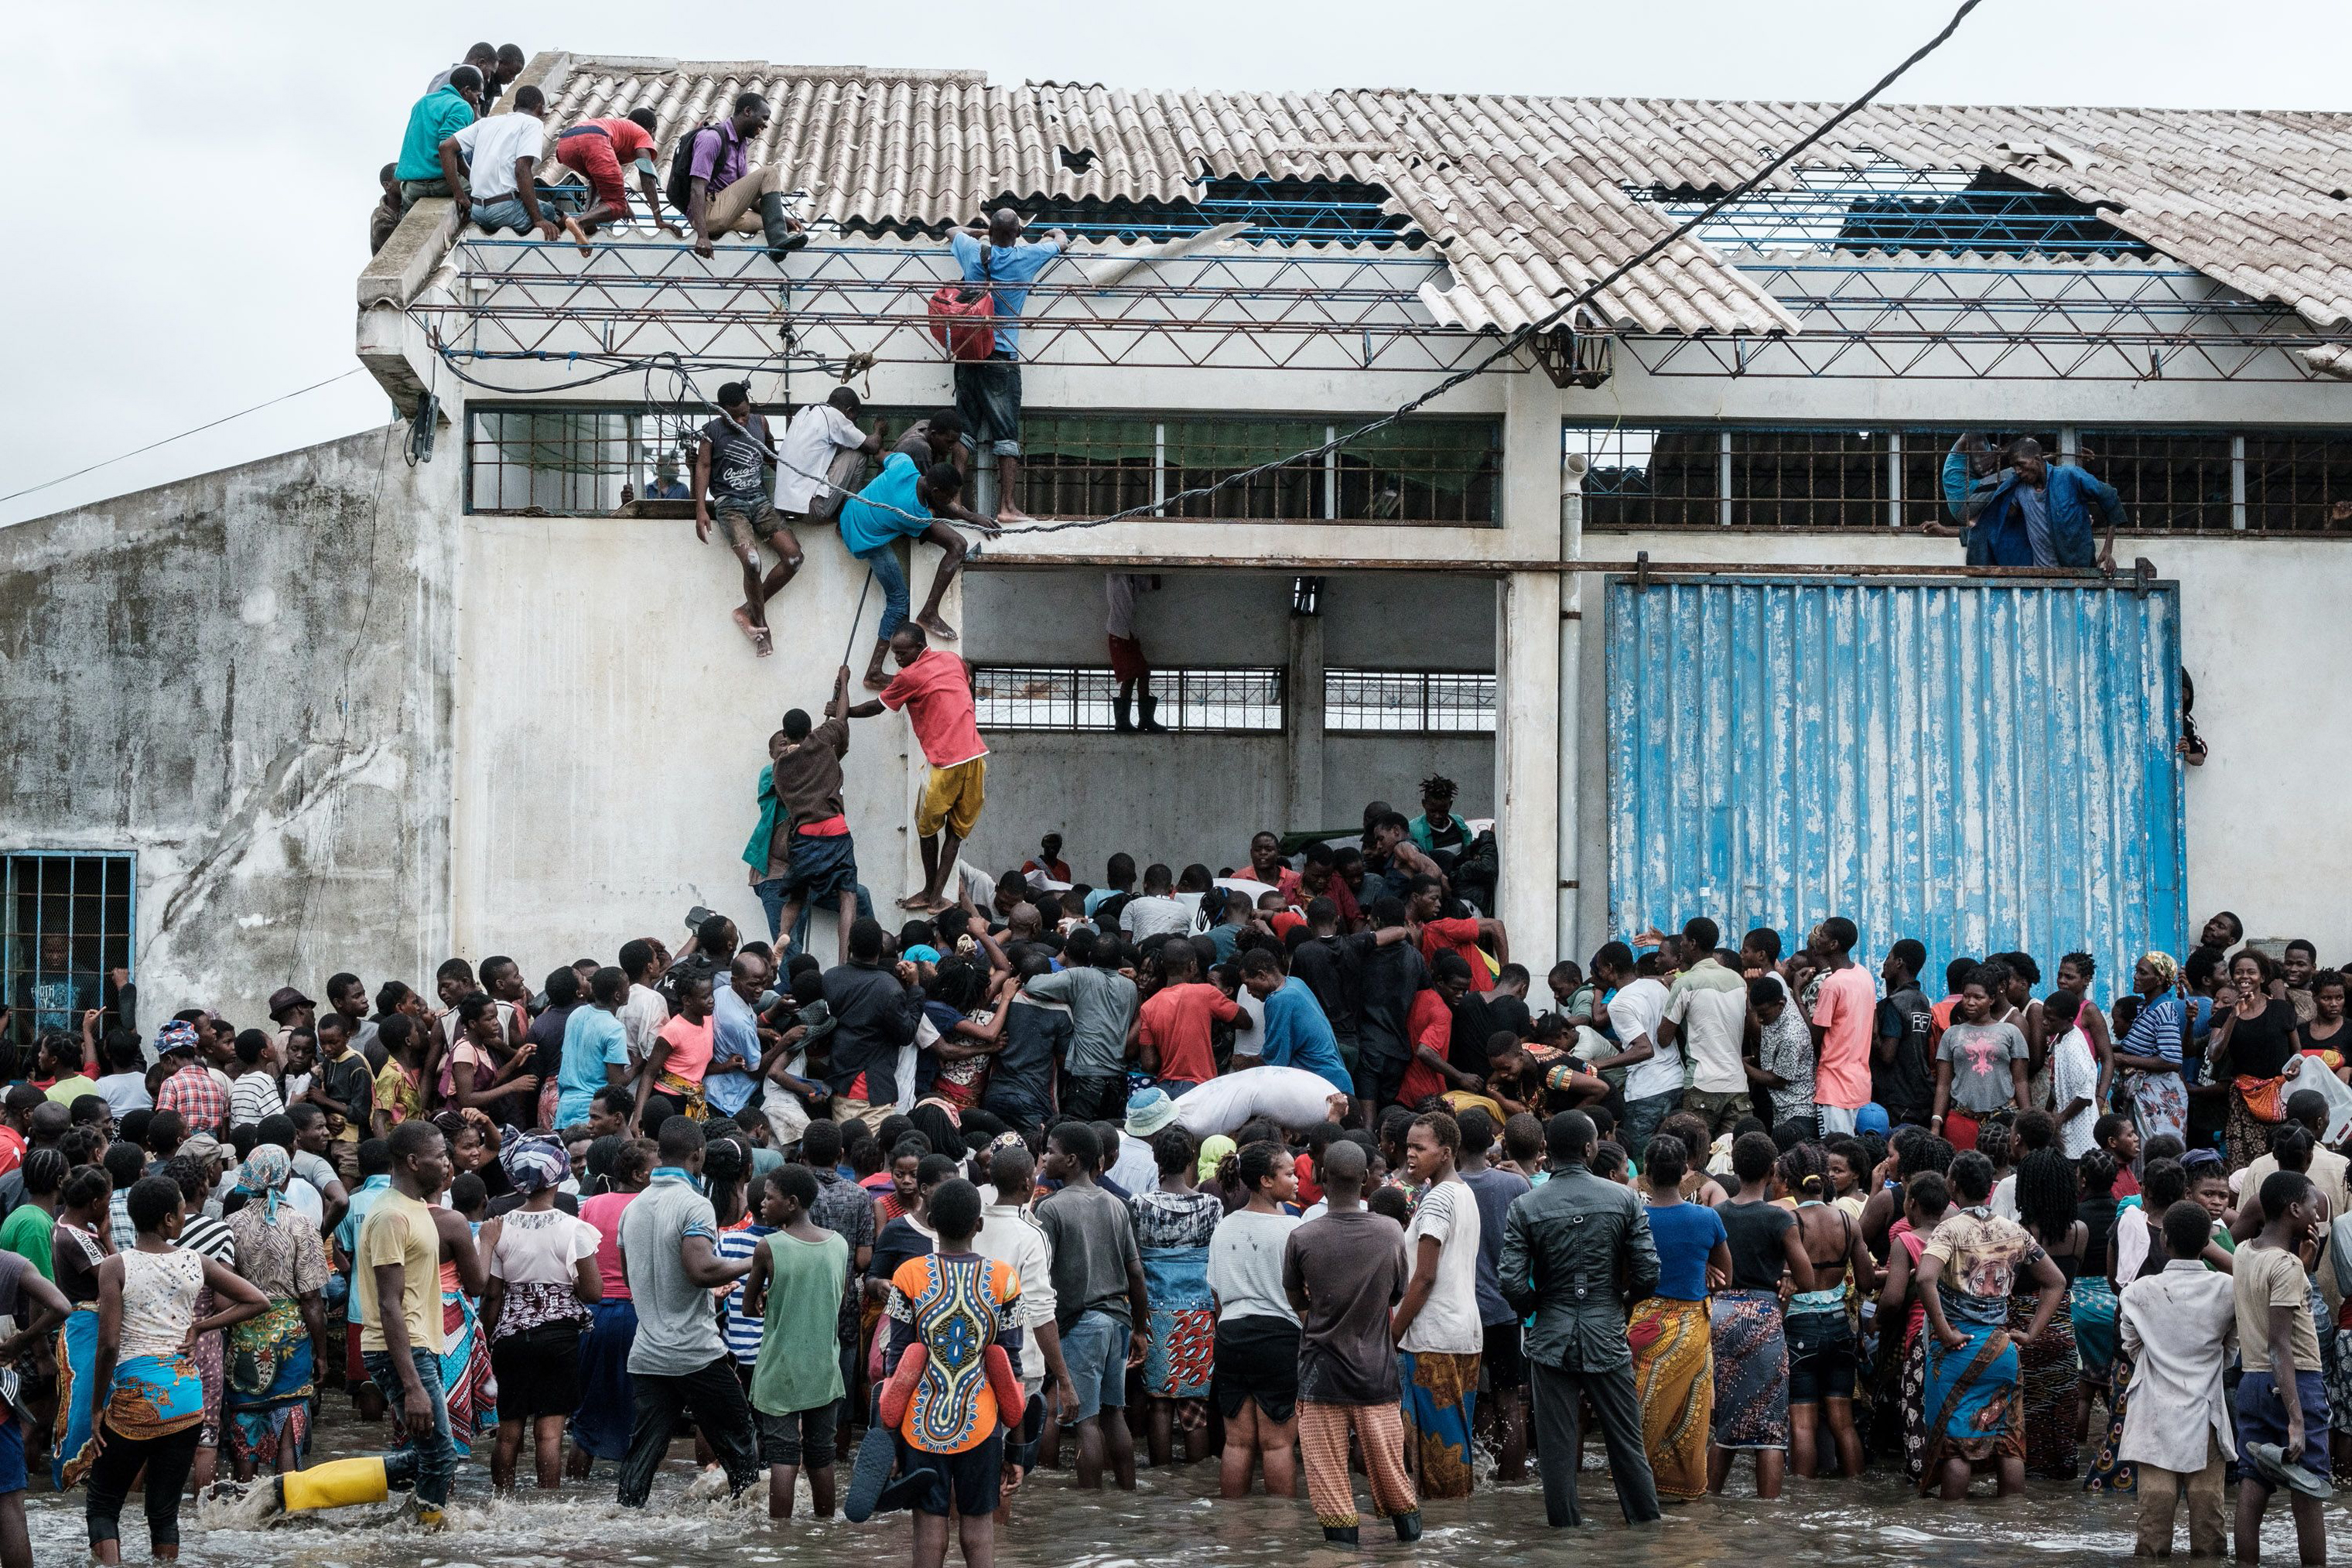 People looting sacks of Chinese rice from a warehouse surrounded by water in Beira, Mozambique, on March 20, 2019. (Yasuyoshi Chiba—AFP/Getty Images)